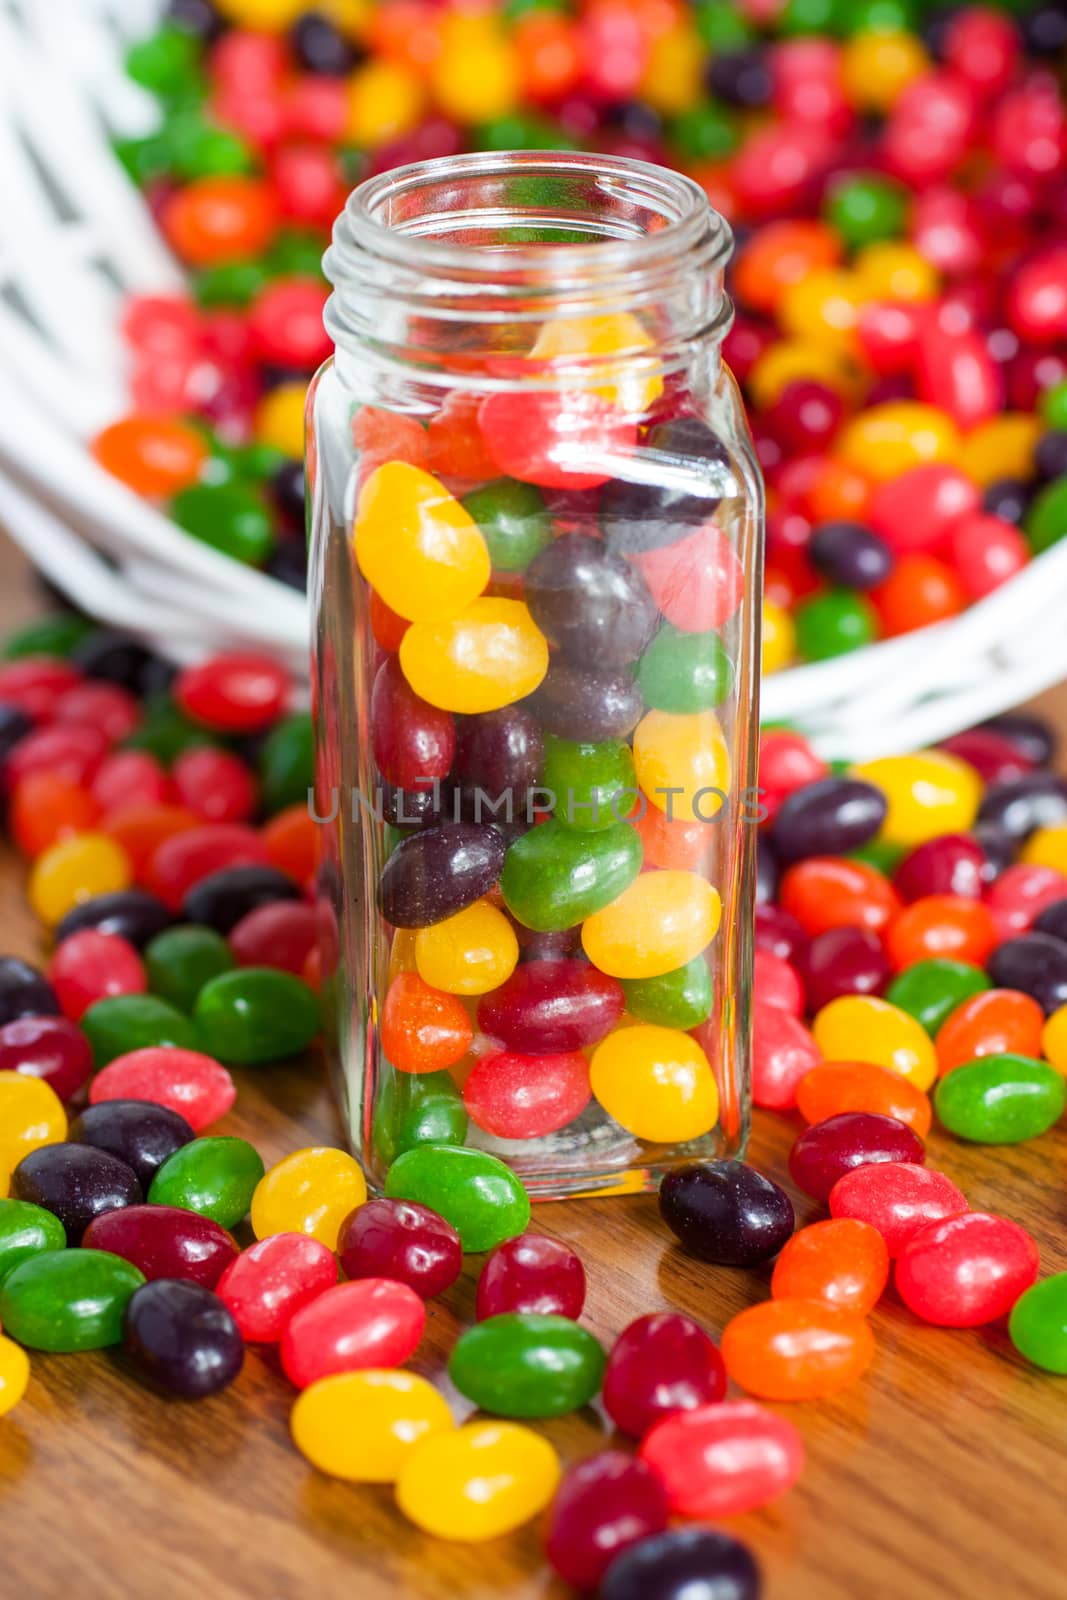 Jelly Beans In a Jar by SouthernLightStudios